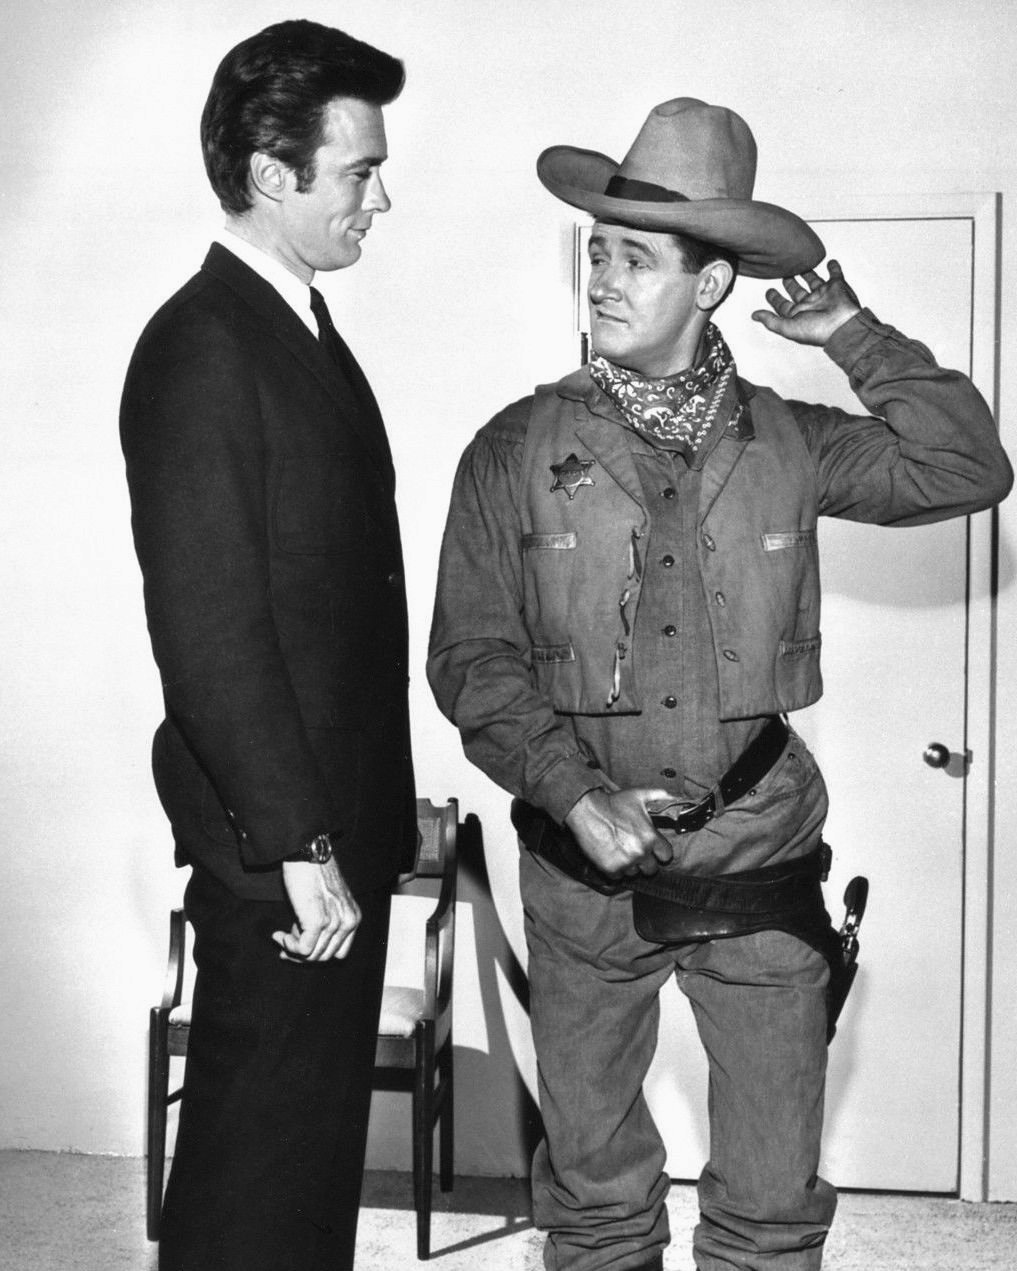 ALAN YOUNG & GUEST STAR CLINT EASTWOOD 